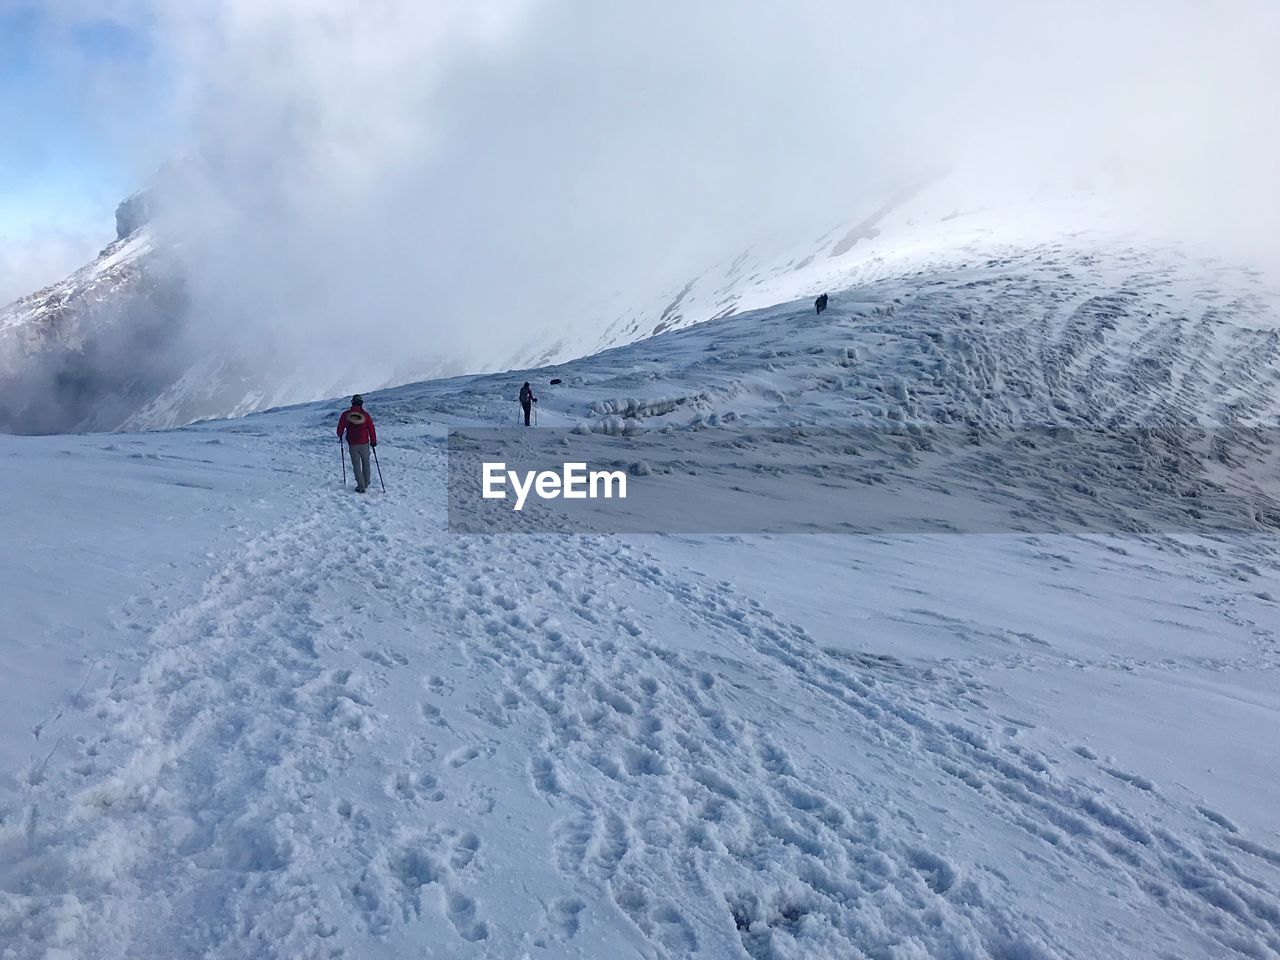 People on snow covered mountain against cloudy sky